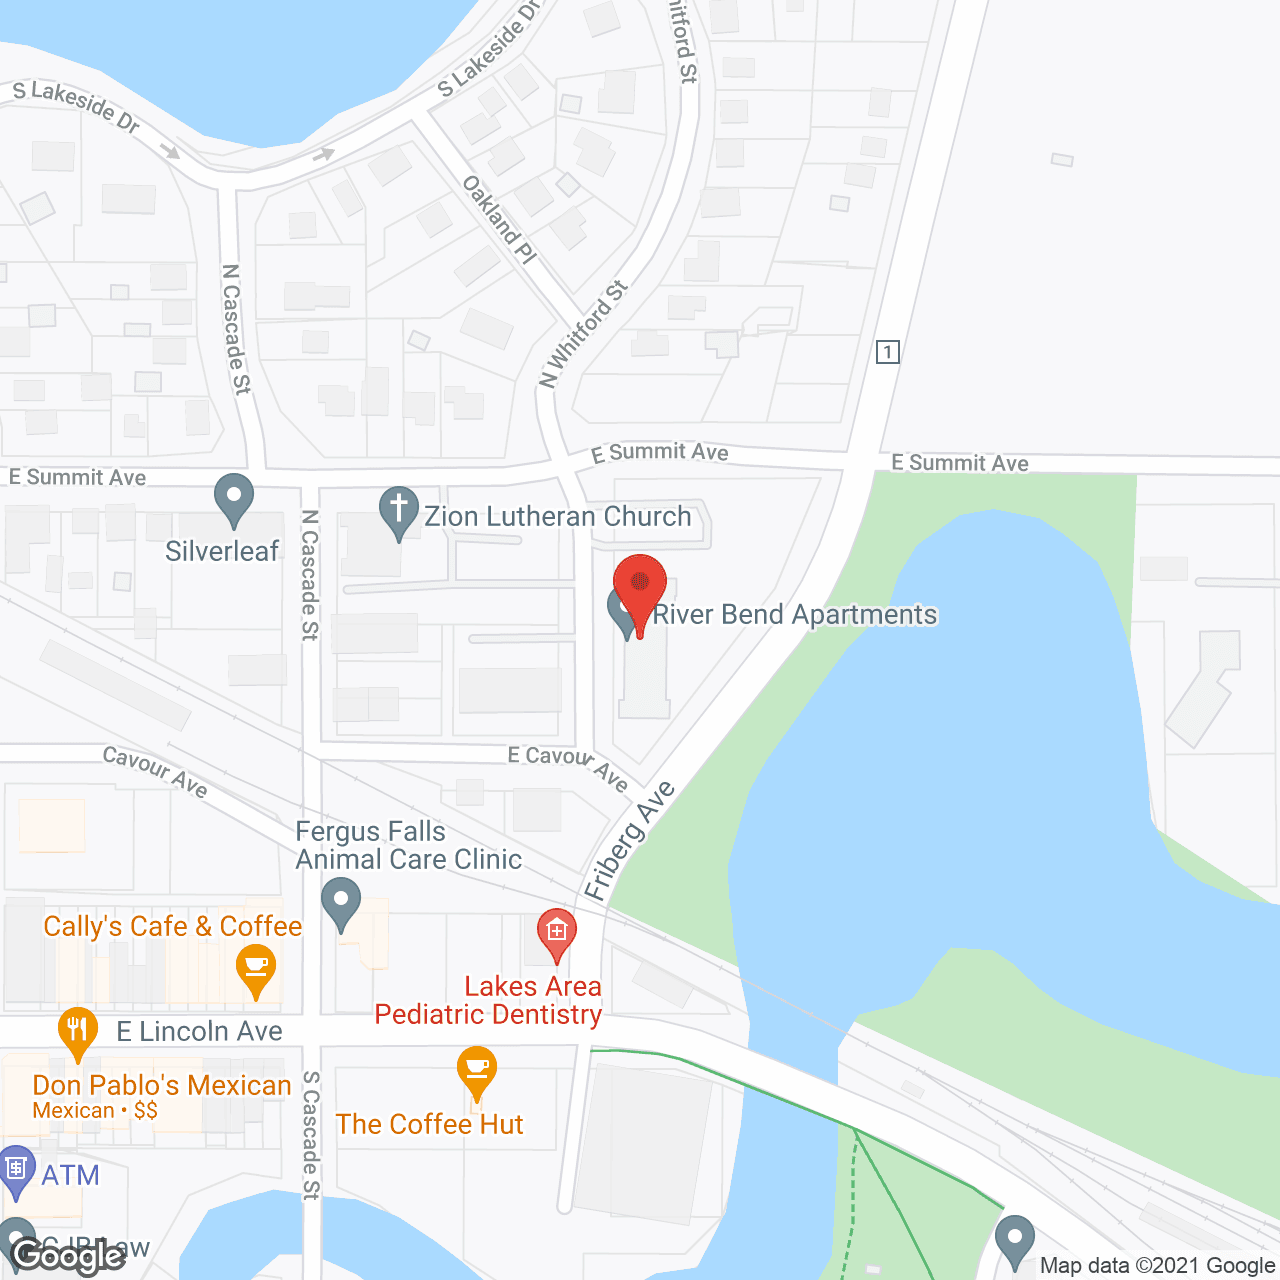 River Bend Apartments in google map